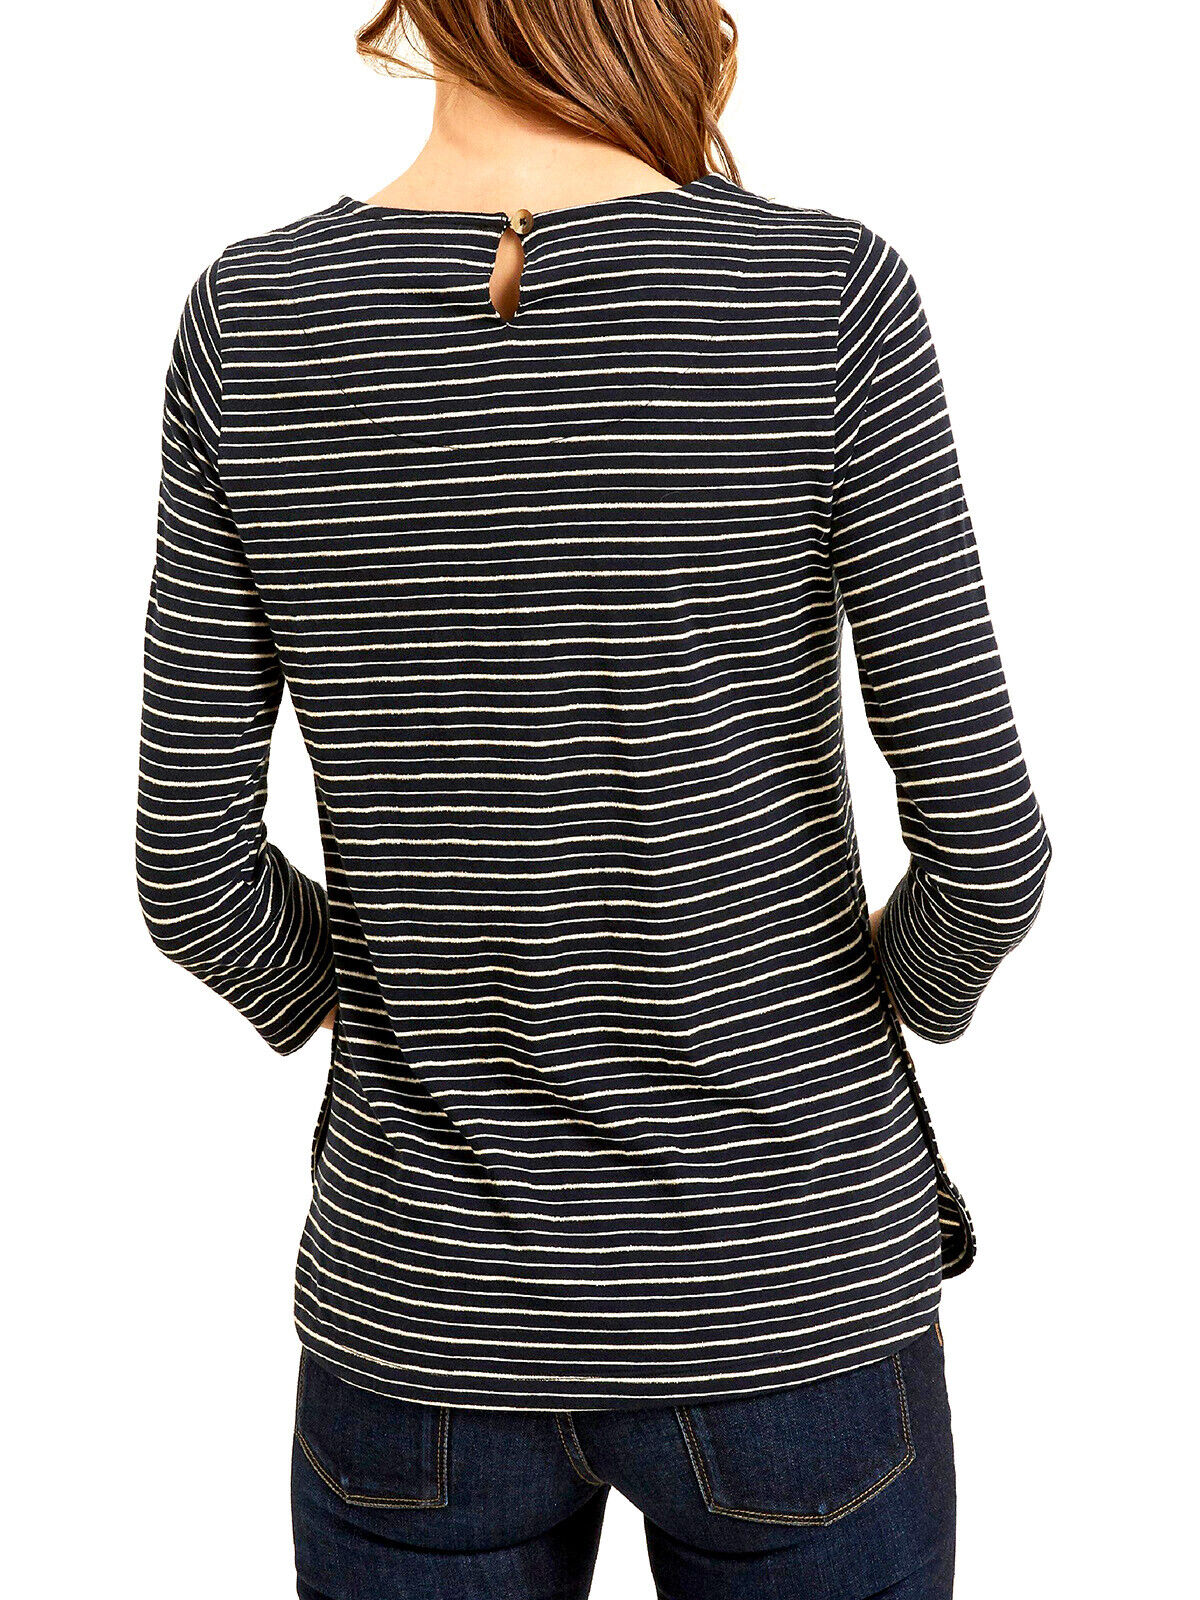 EX Fat Face Navy Tulip Sparkle Stripe Top in Sizes 10 or 12 RRP £36